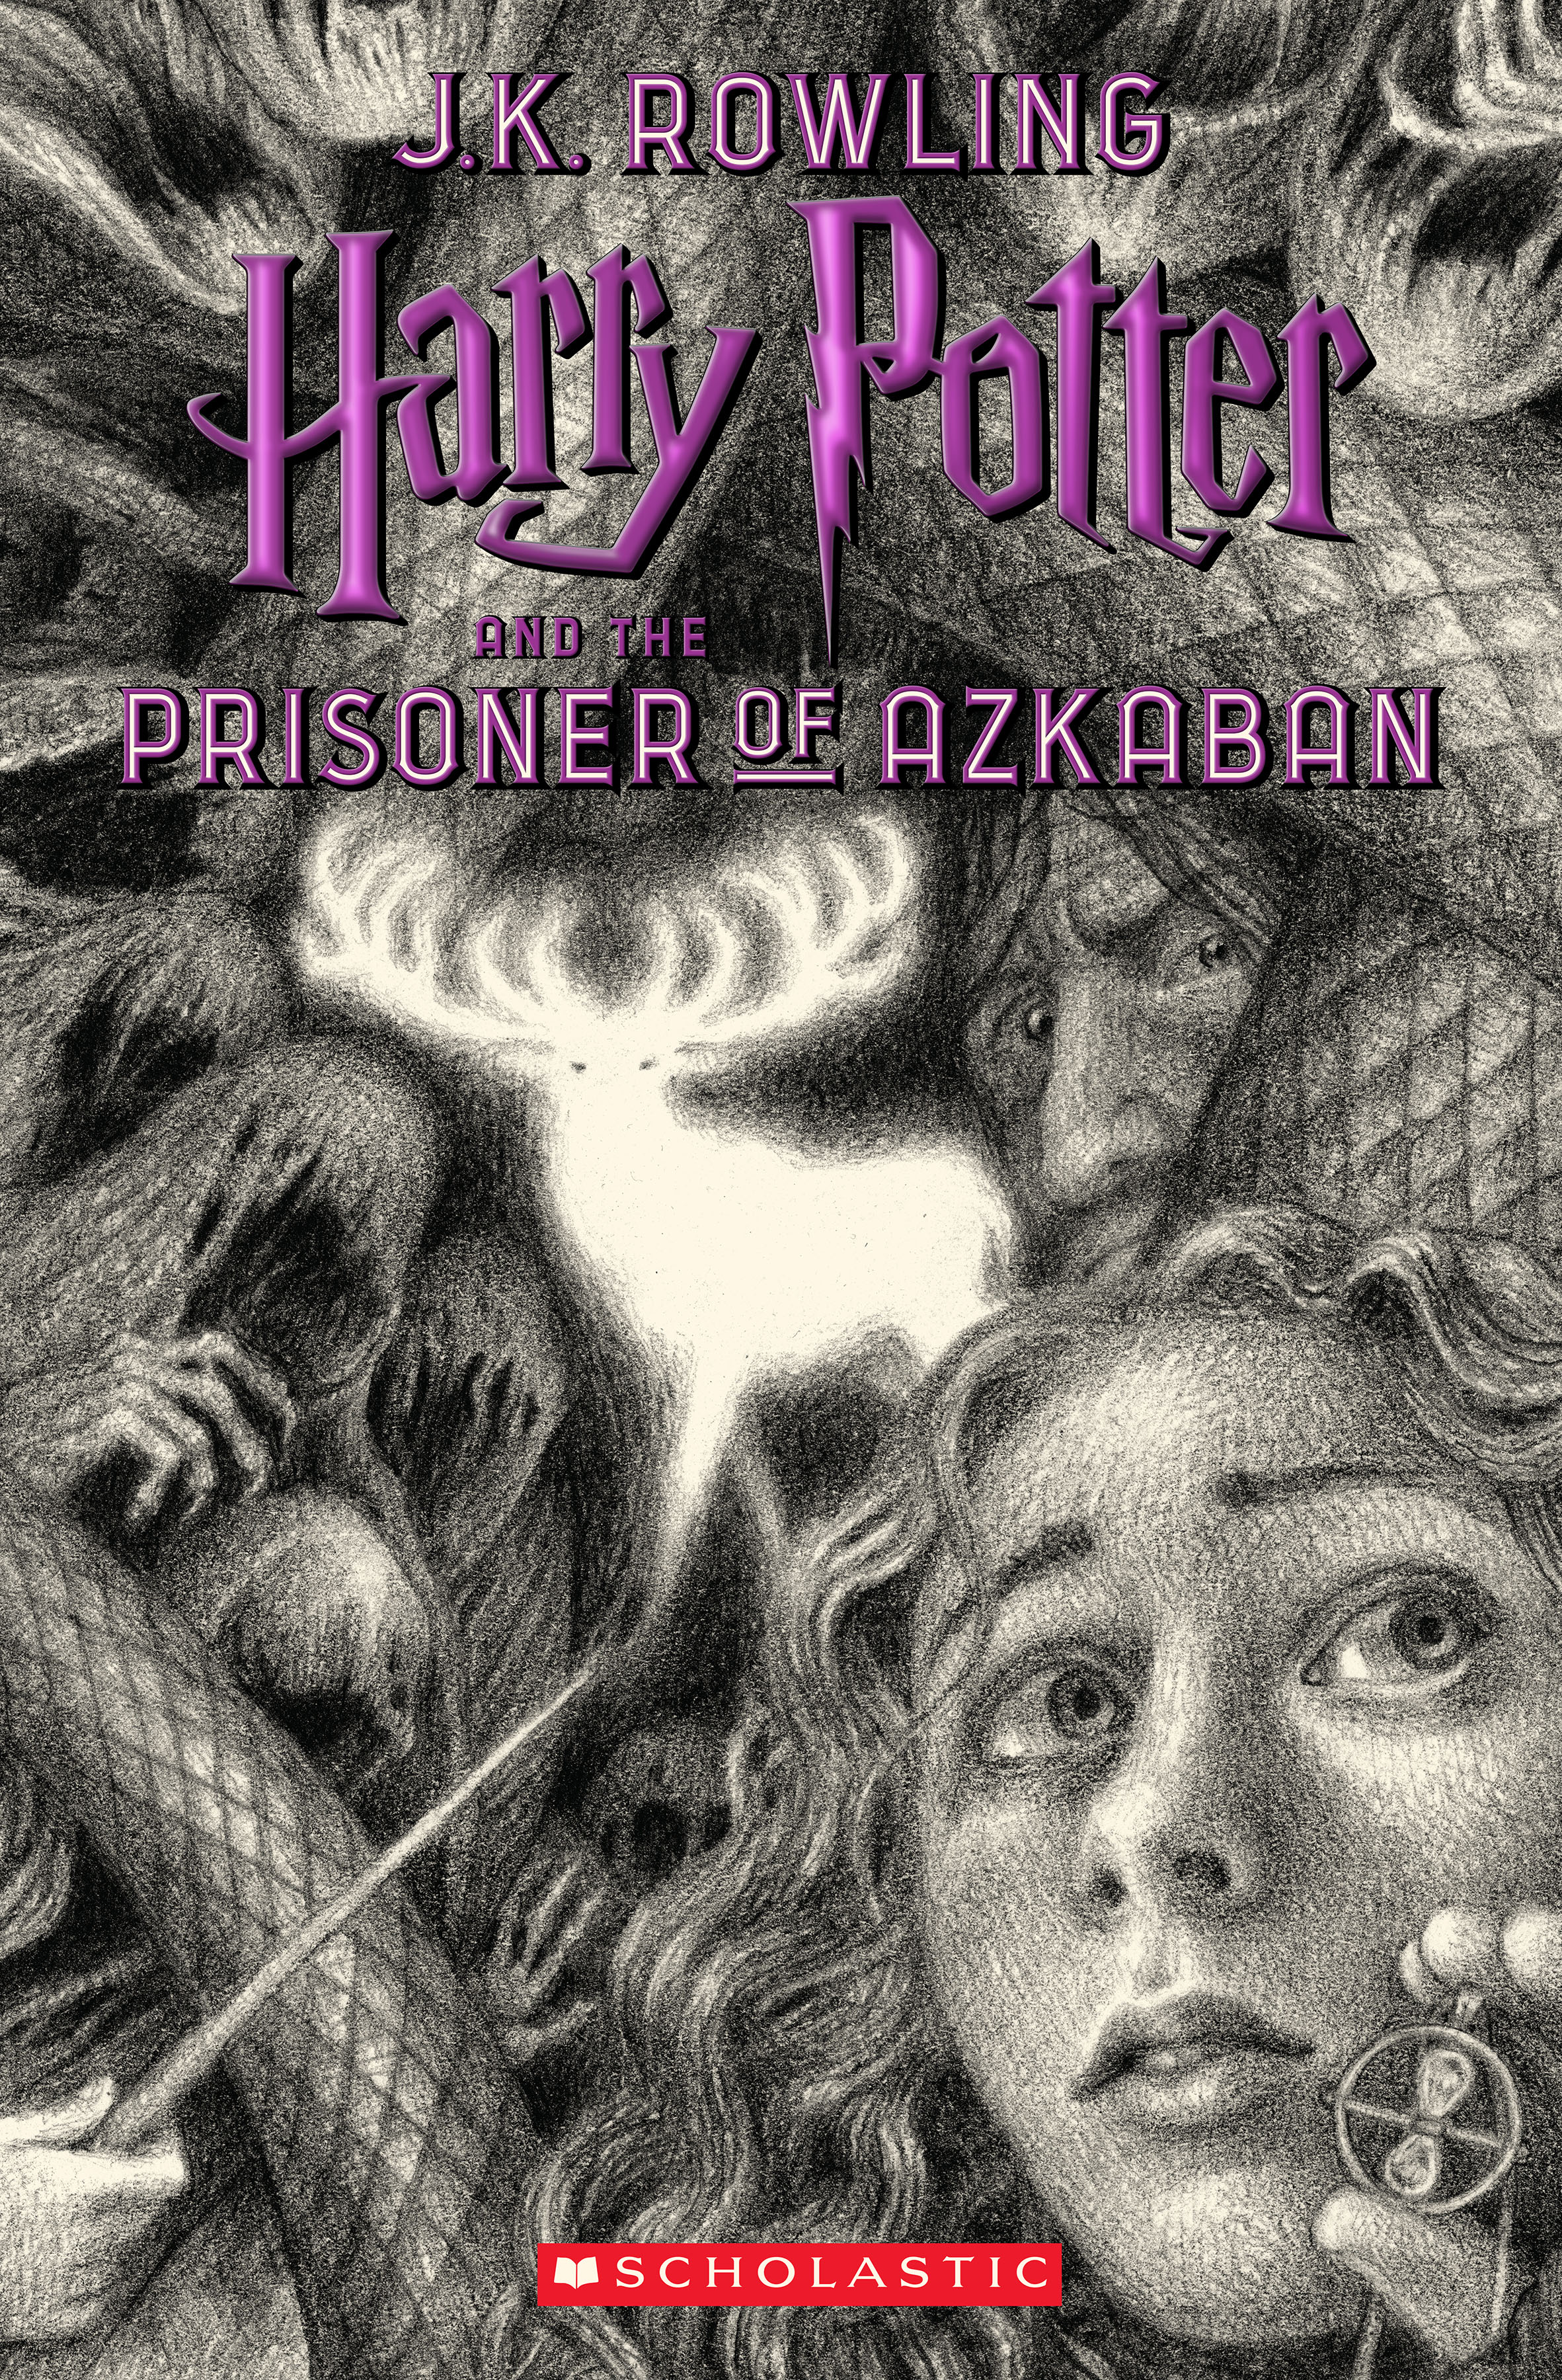 Scholastic Unveils New Covers for J.K. Rowling’s Harry Potter Series